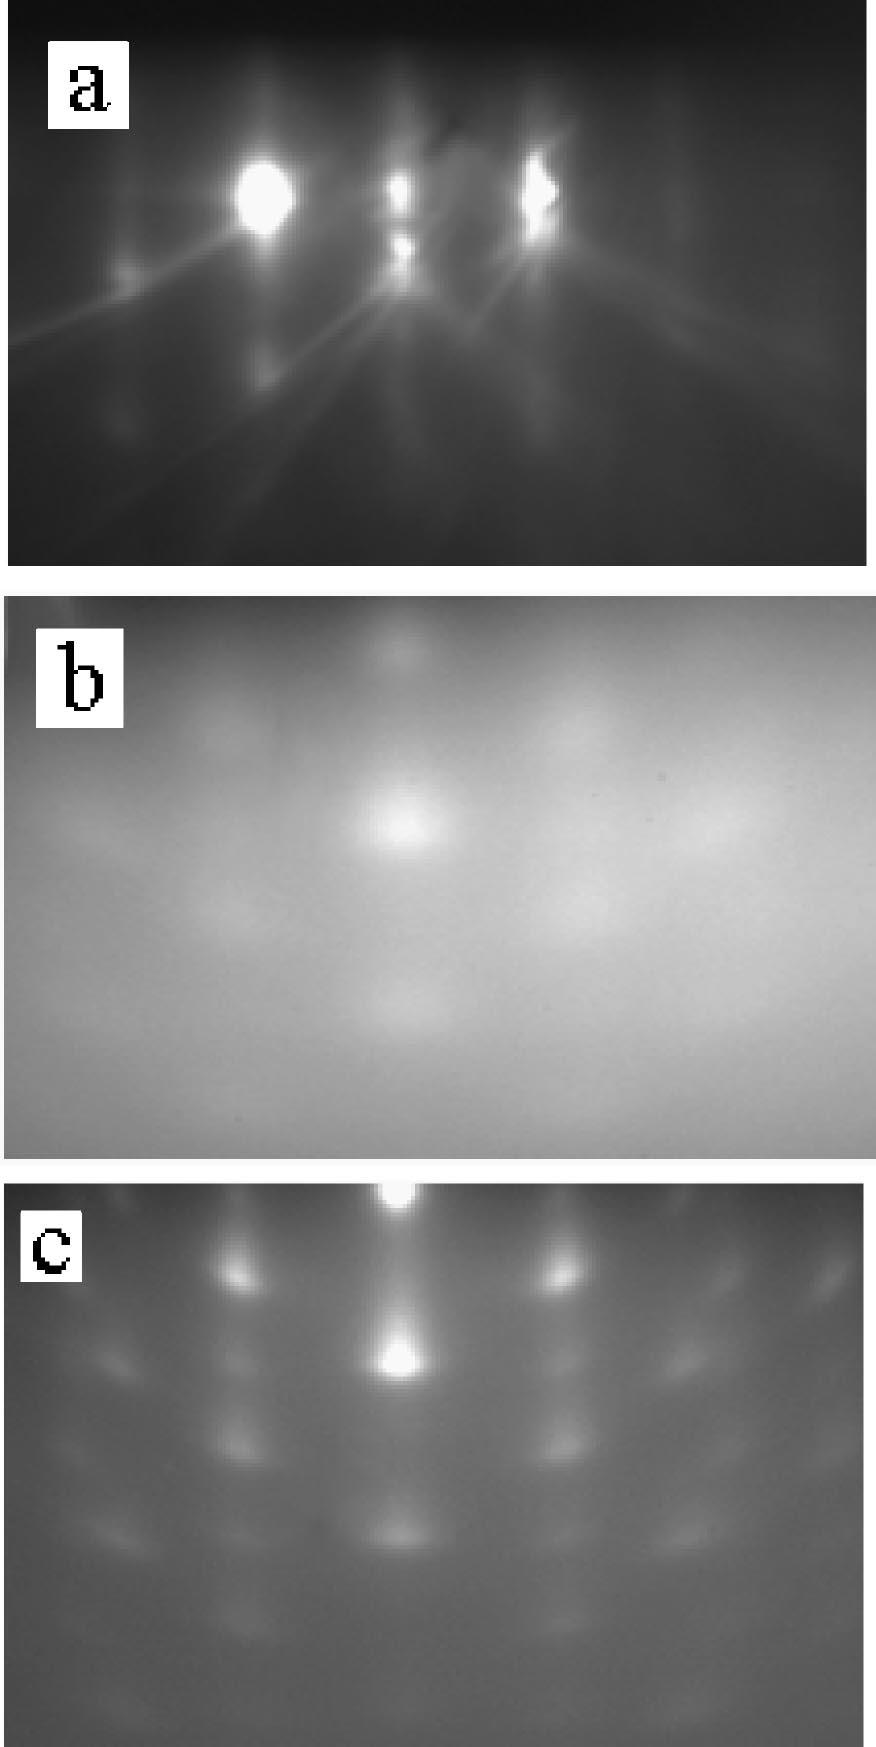 7880 J. Appl. Phys., Vol. 85, No. 11, 1 June 1999 Auner et al. FIG. 1. RHEED patterns viewed along Si 112 azimuth, during AlN deposition at 400 C: a Si, b after depositing 200 Å AlN, and c after depositing 3000 Å of AlN.